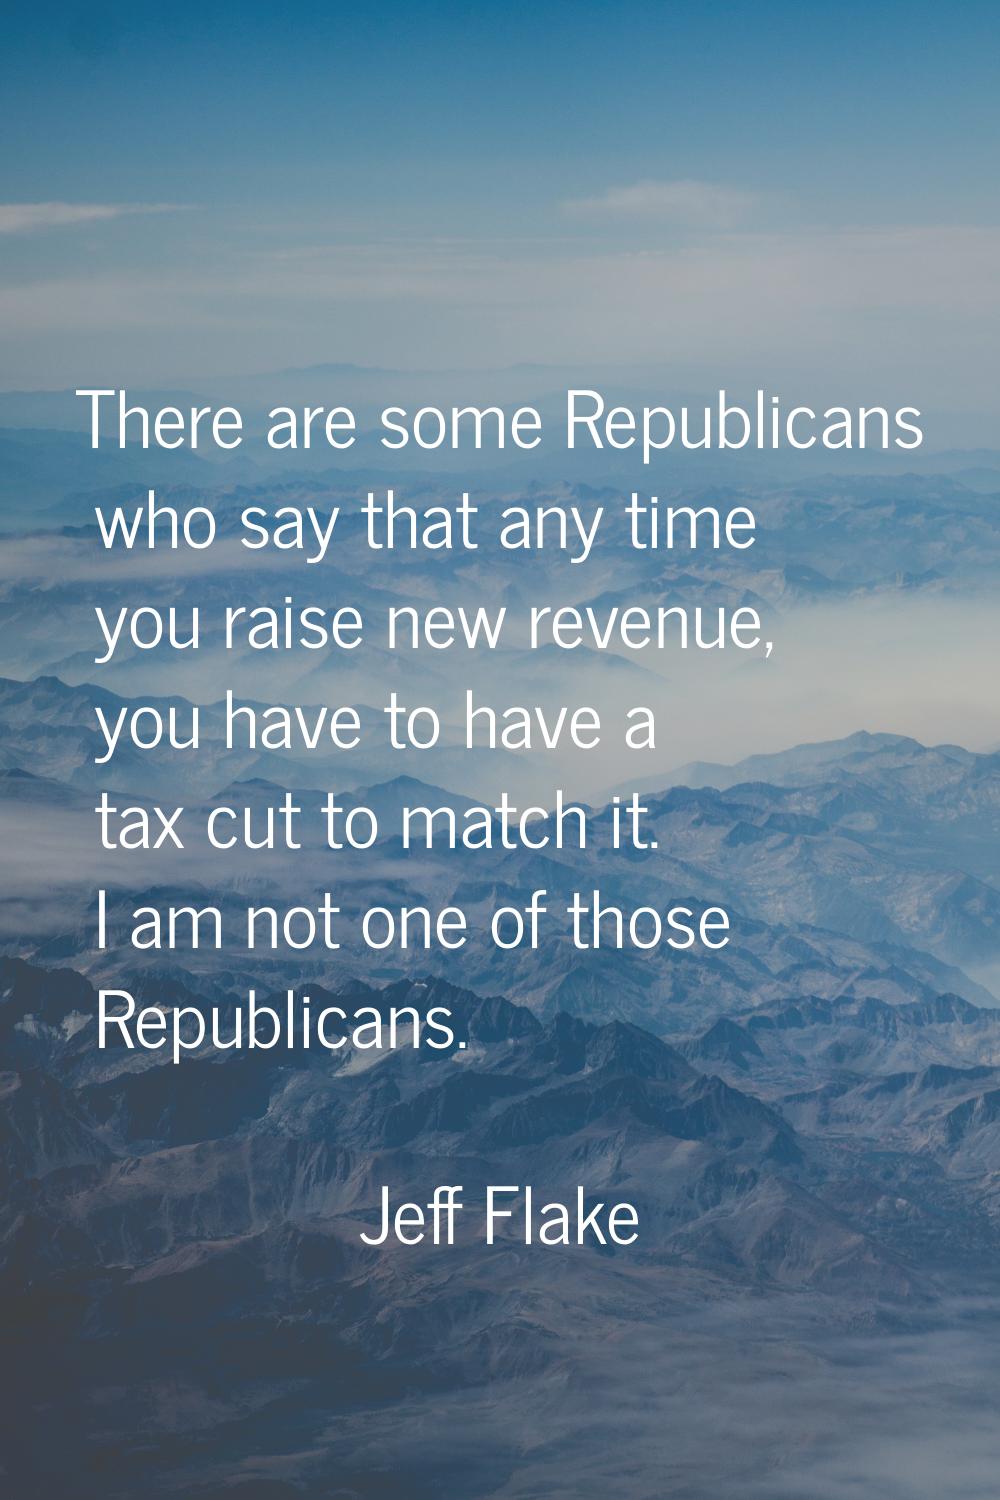 There are some Republicans who say that any time you raise new revenue, you have to have a tax cut 